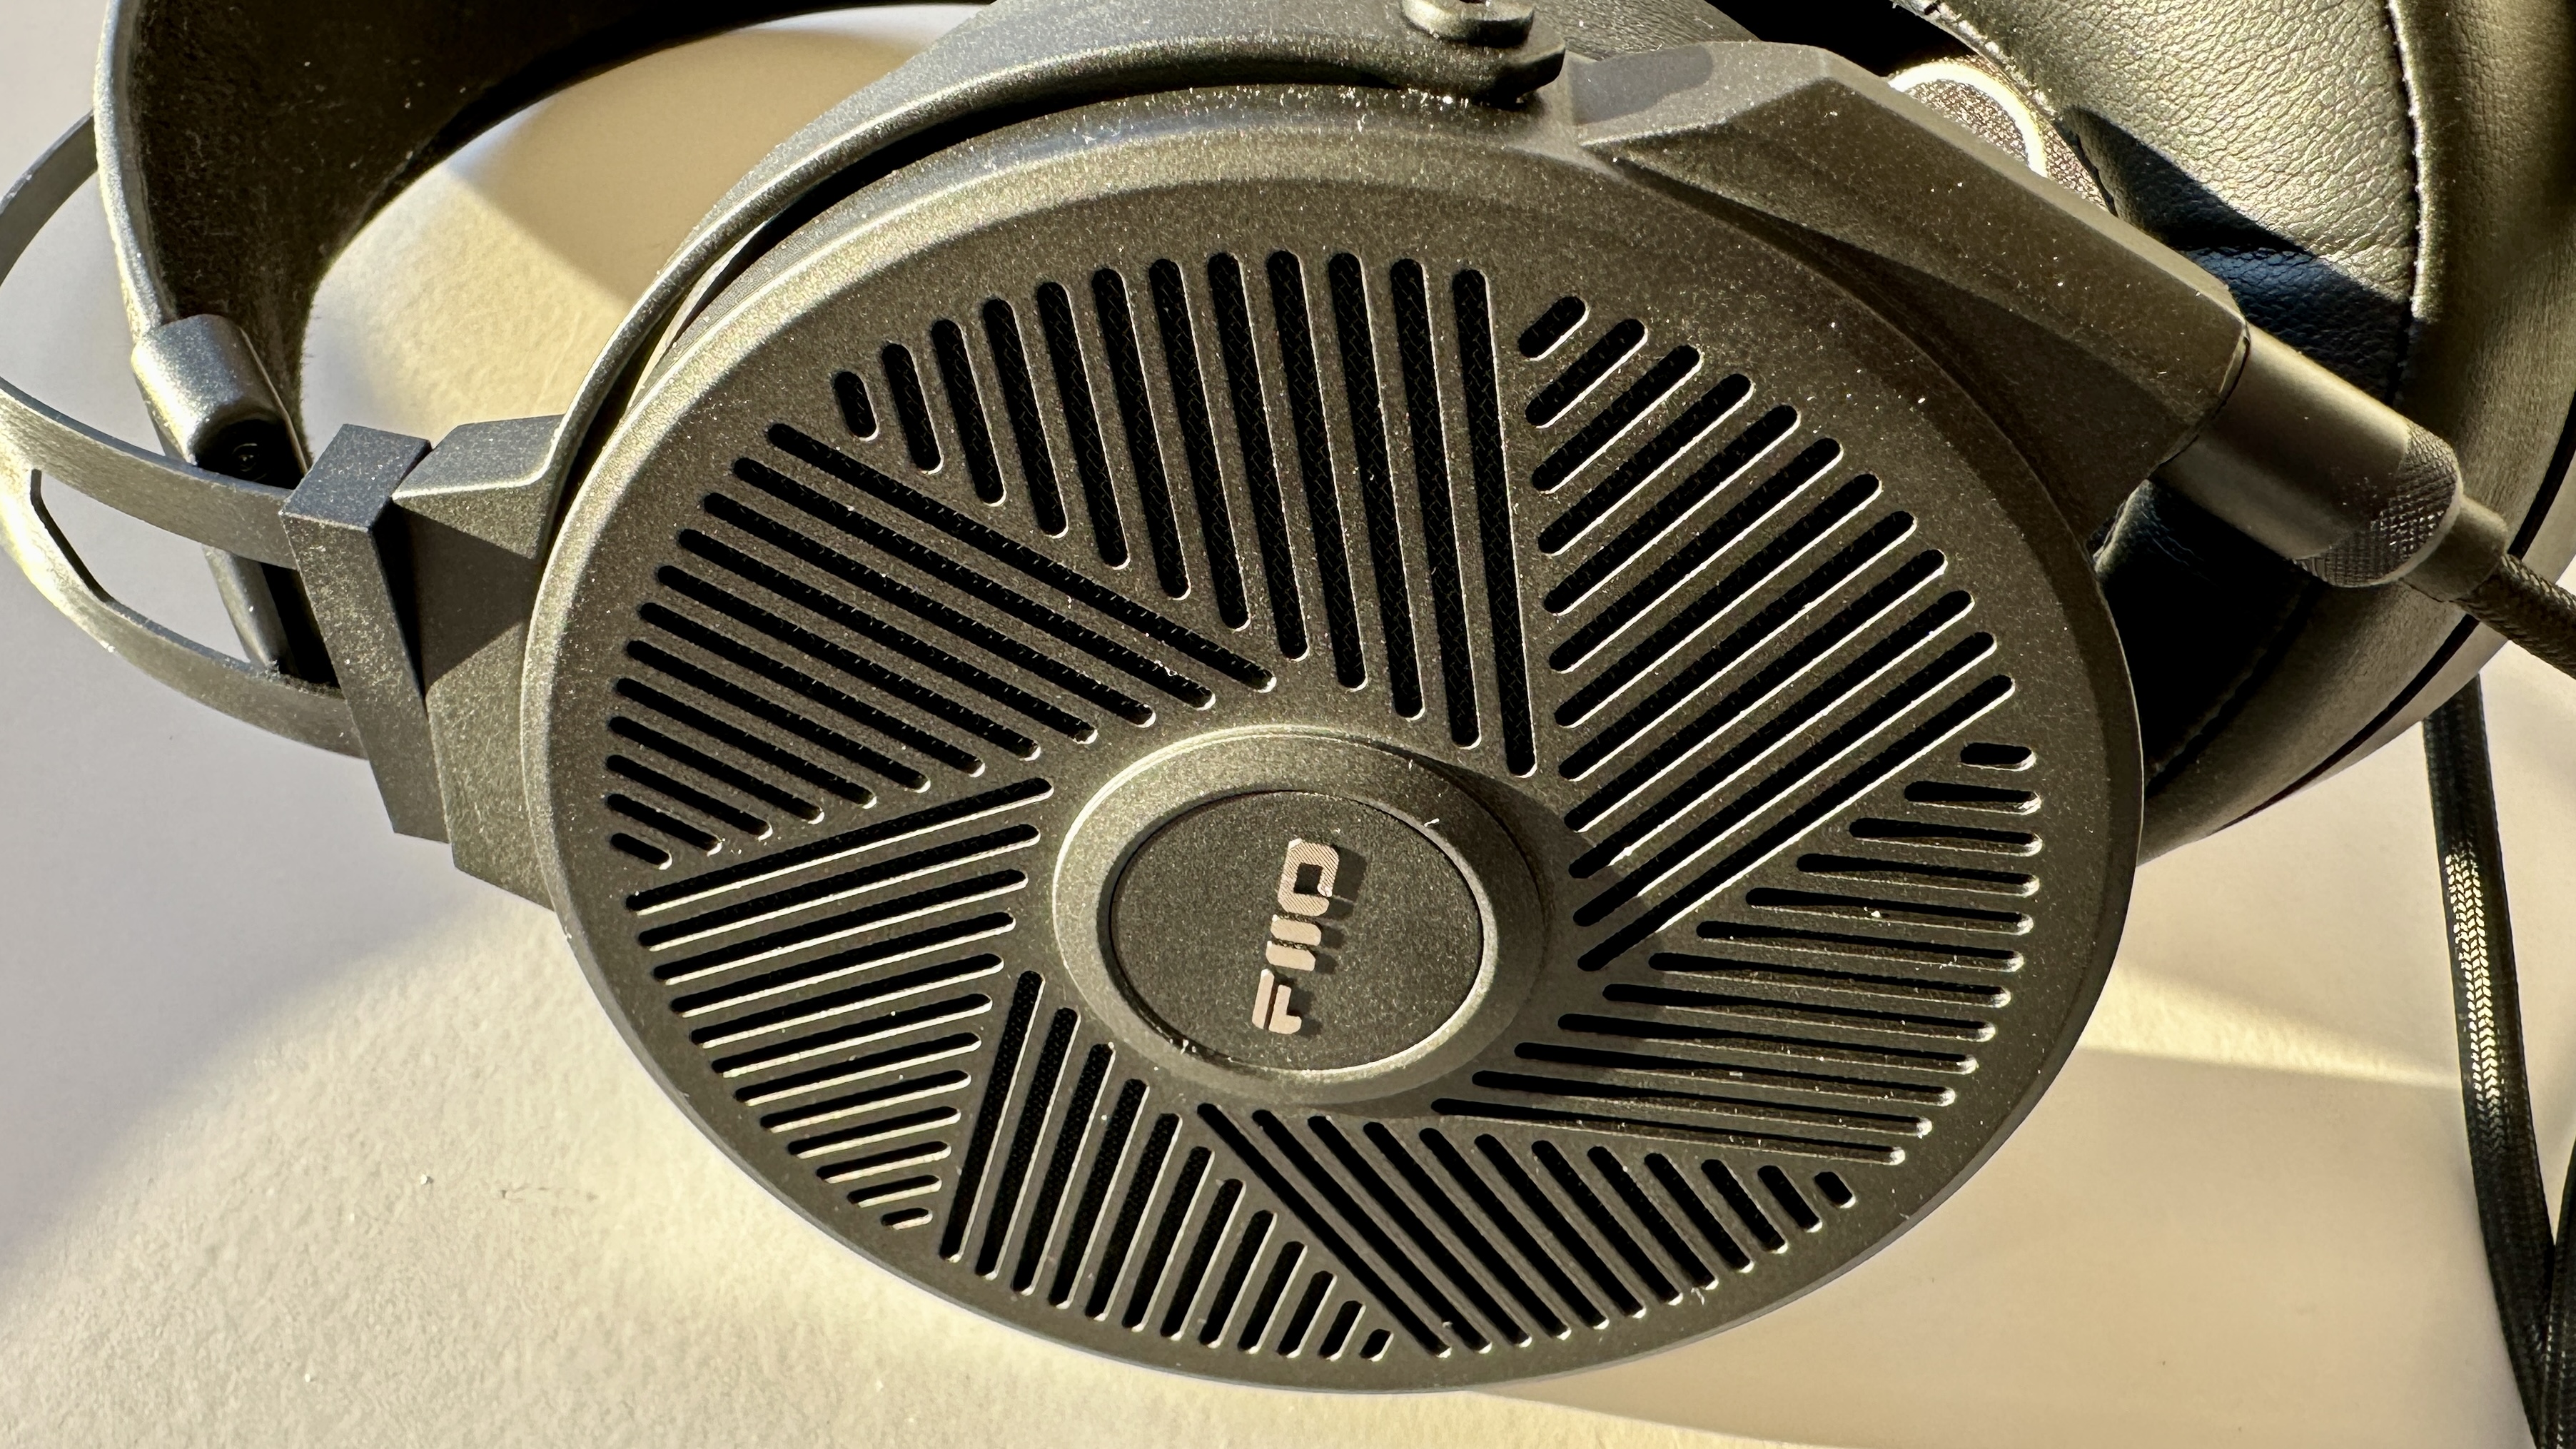 Fiio FT5 headphones, closeup of the planar magnetic, open-backed driver housing